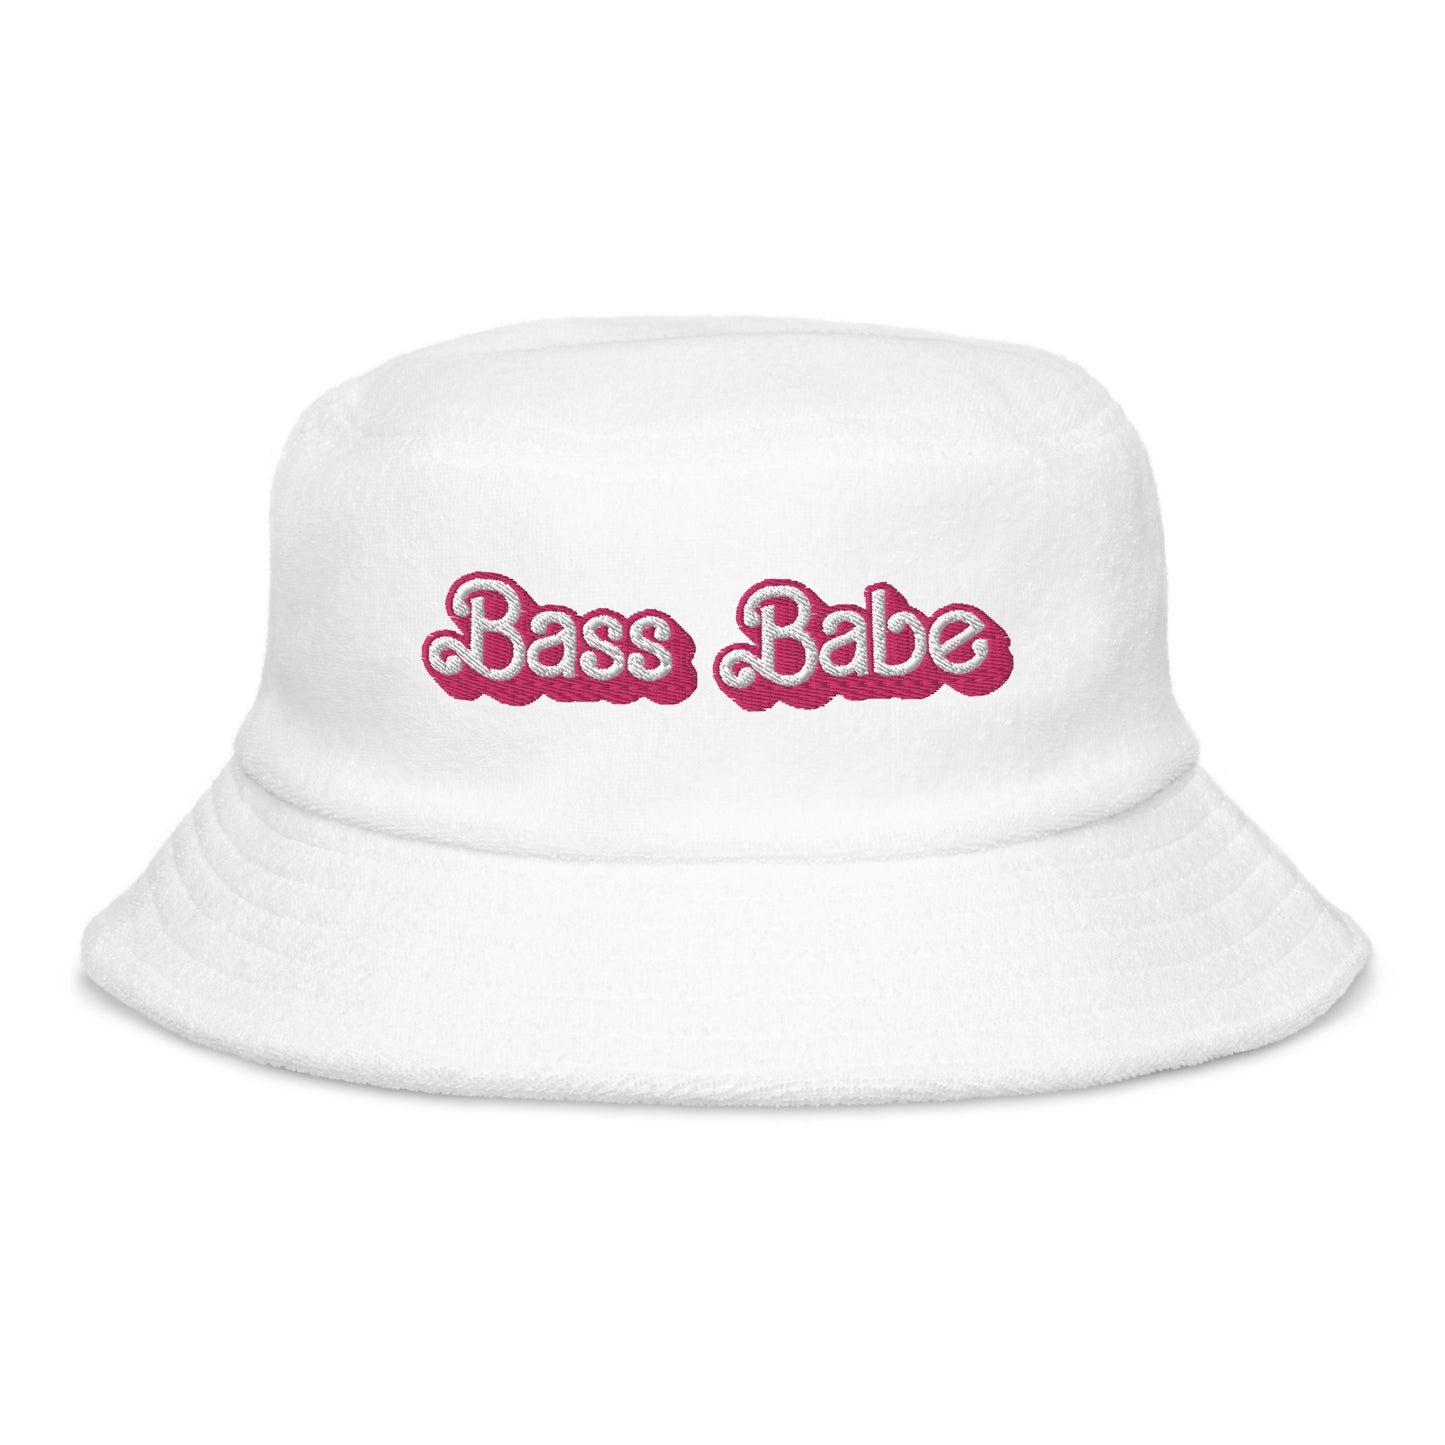 Dolly Font Bass Babe Pastel Unisex Embroidered Terry Cloth Bucket Hat